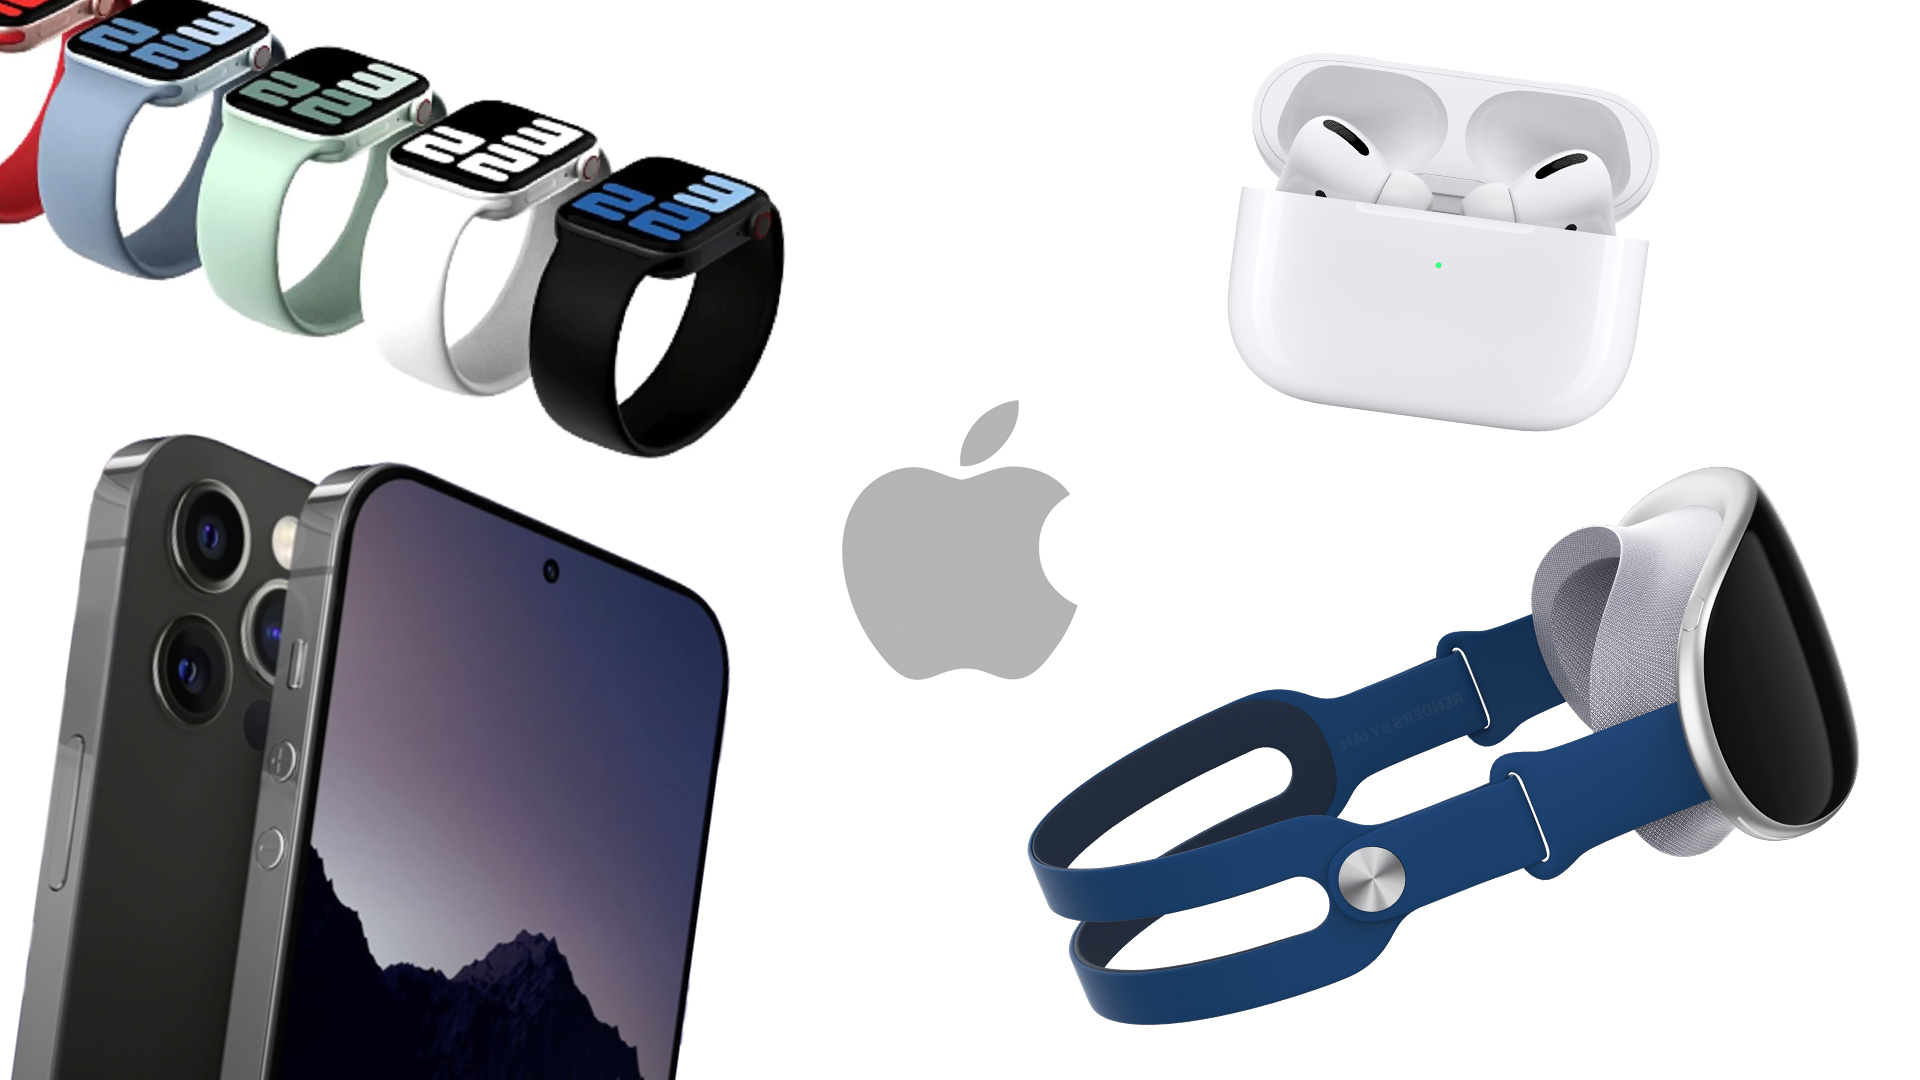 Apple event our (actually realistic) product predictions for 8 March